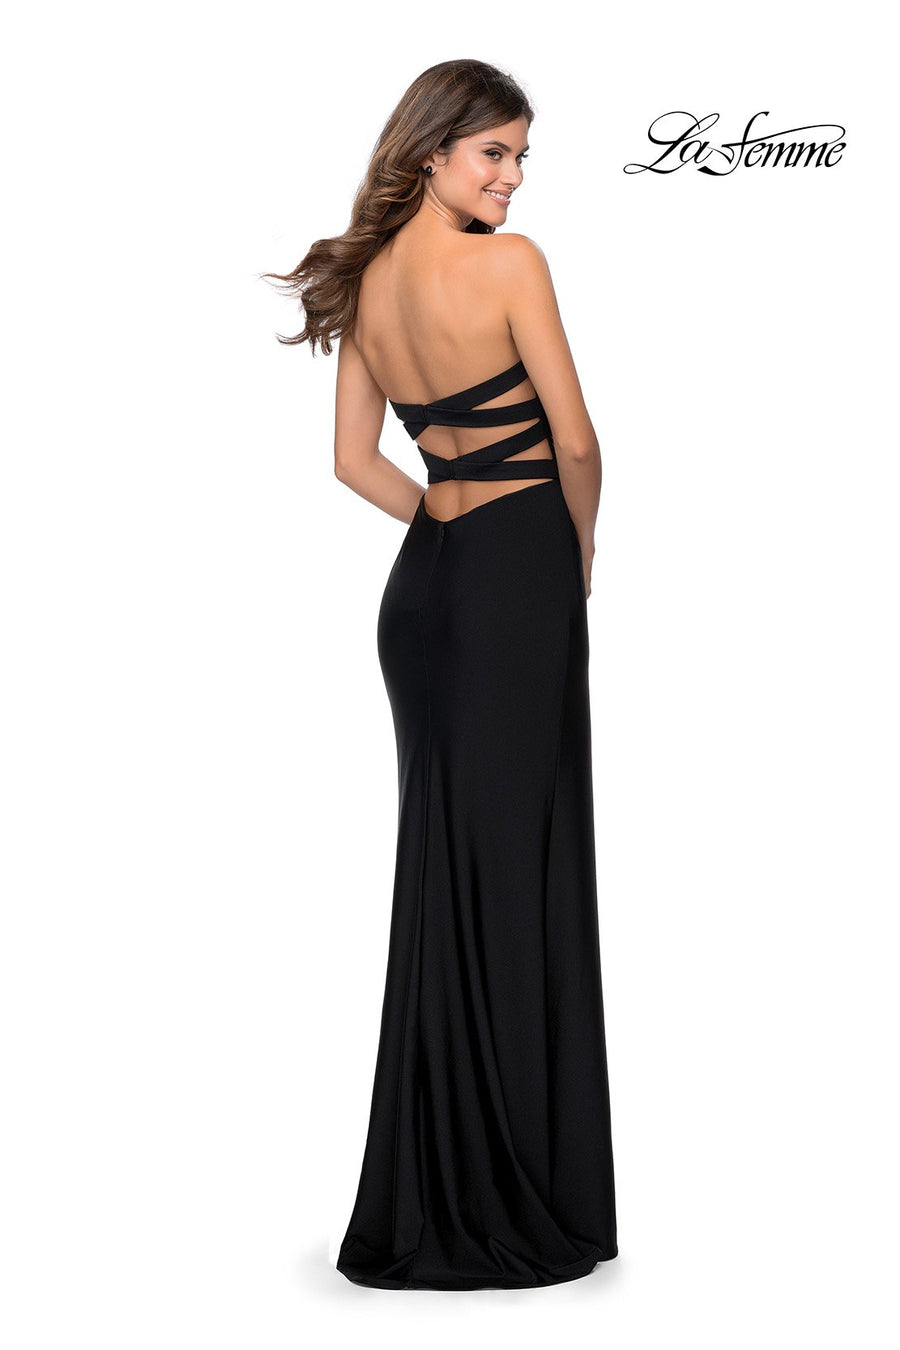 La Femme 28944 prom dress images.  La Femme 28944 is available in these colors: Black, Neon Coral.